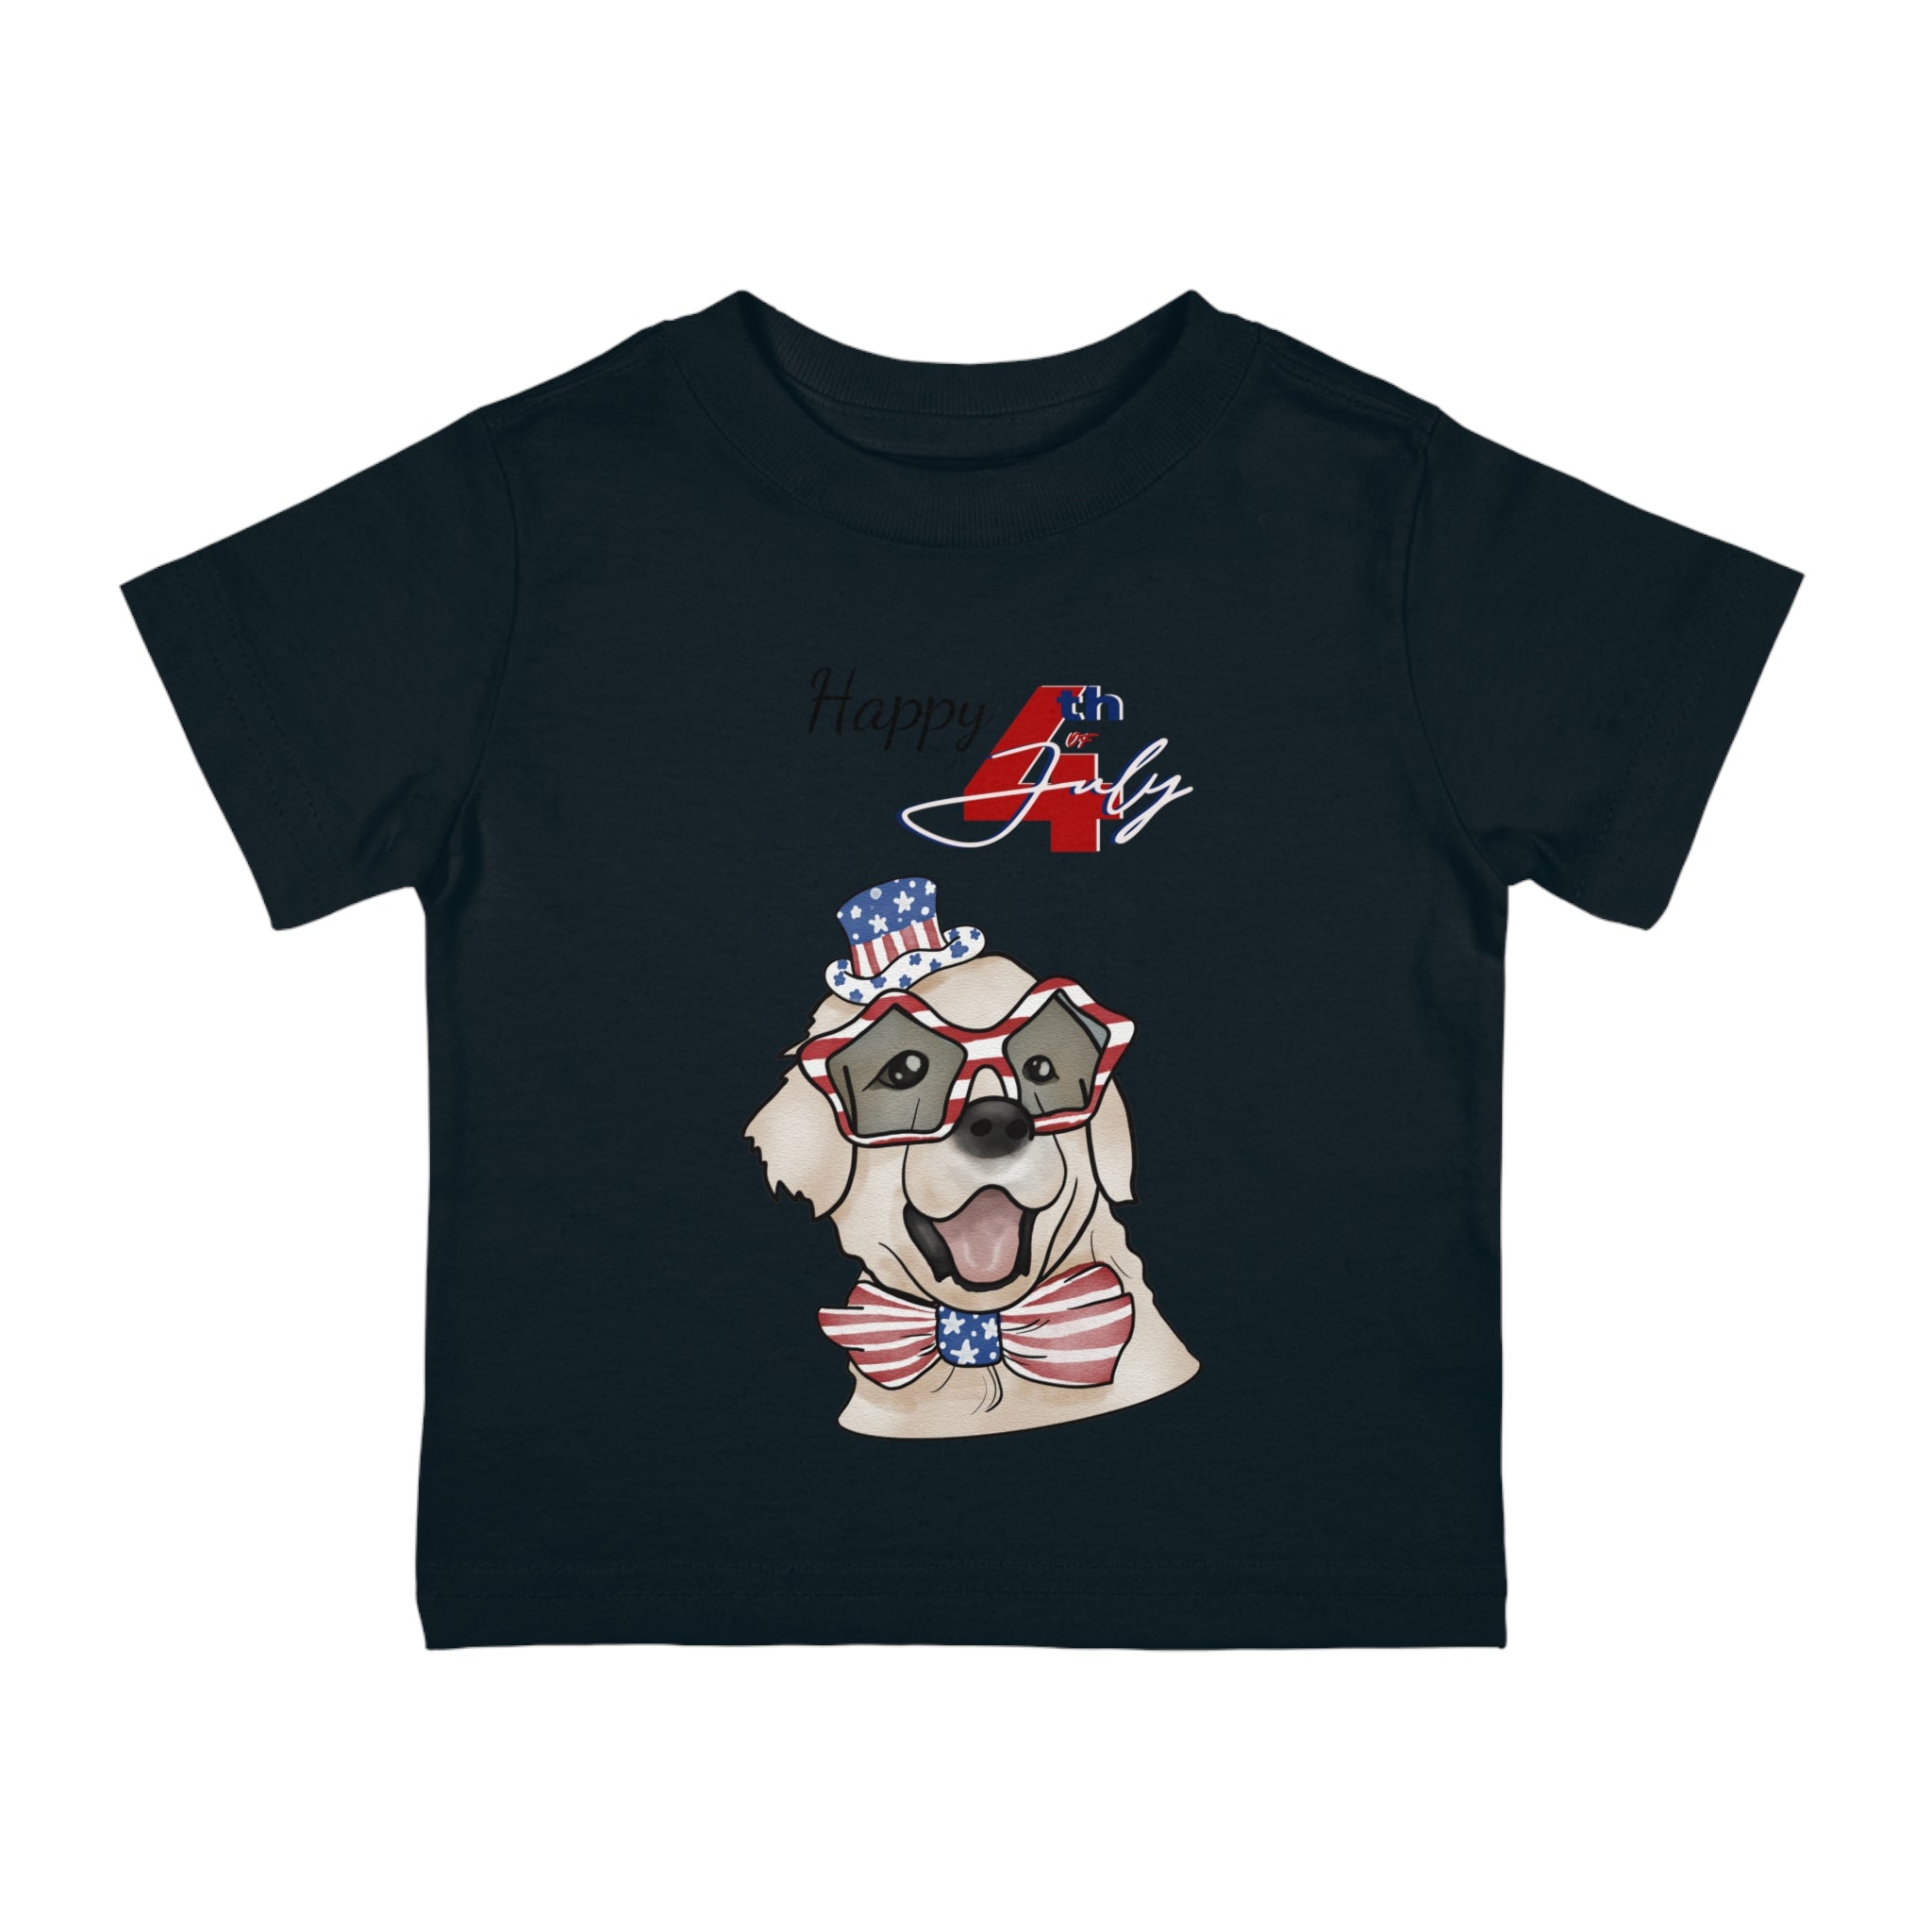 Happy 4th of July Cool Dog Infant Shirt, Baby Tee, Infant Tee